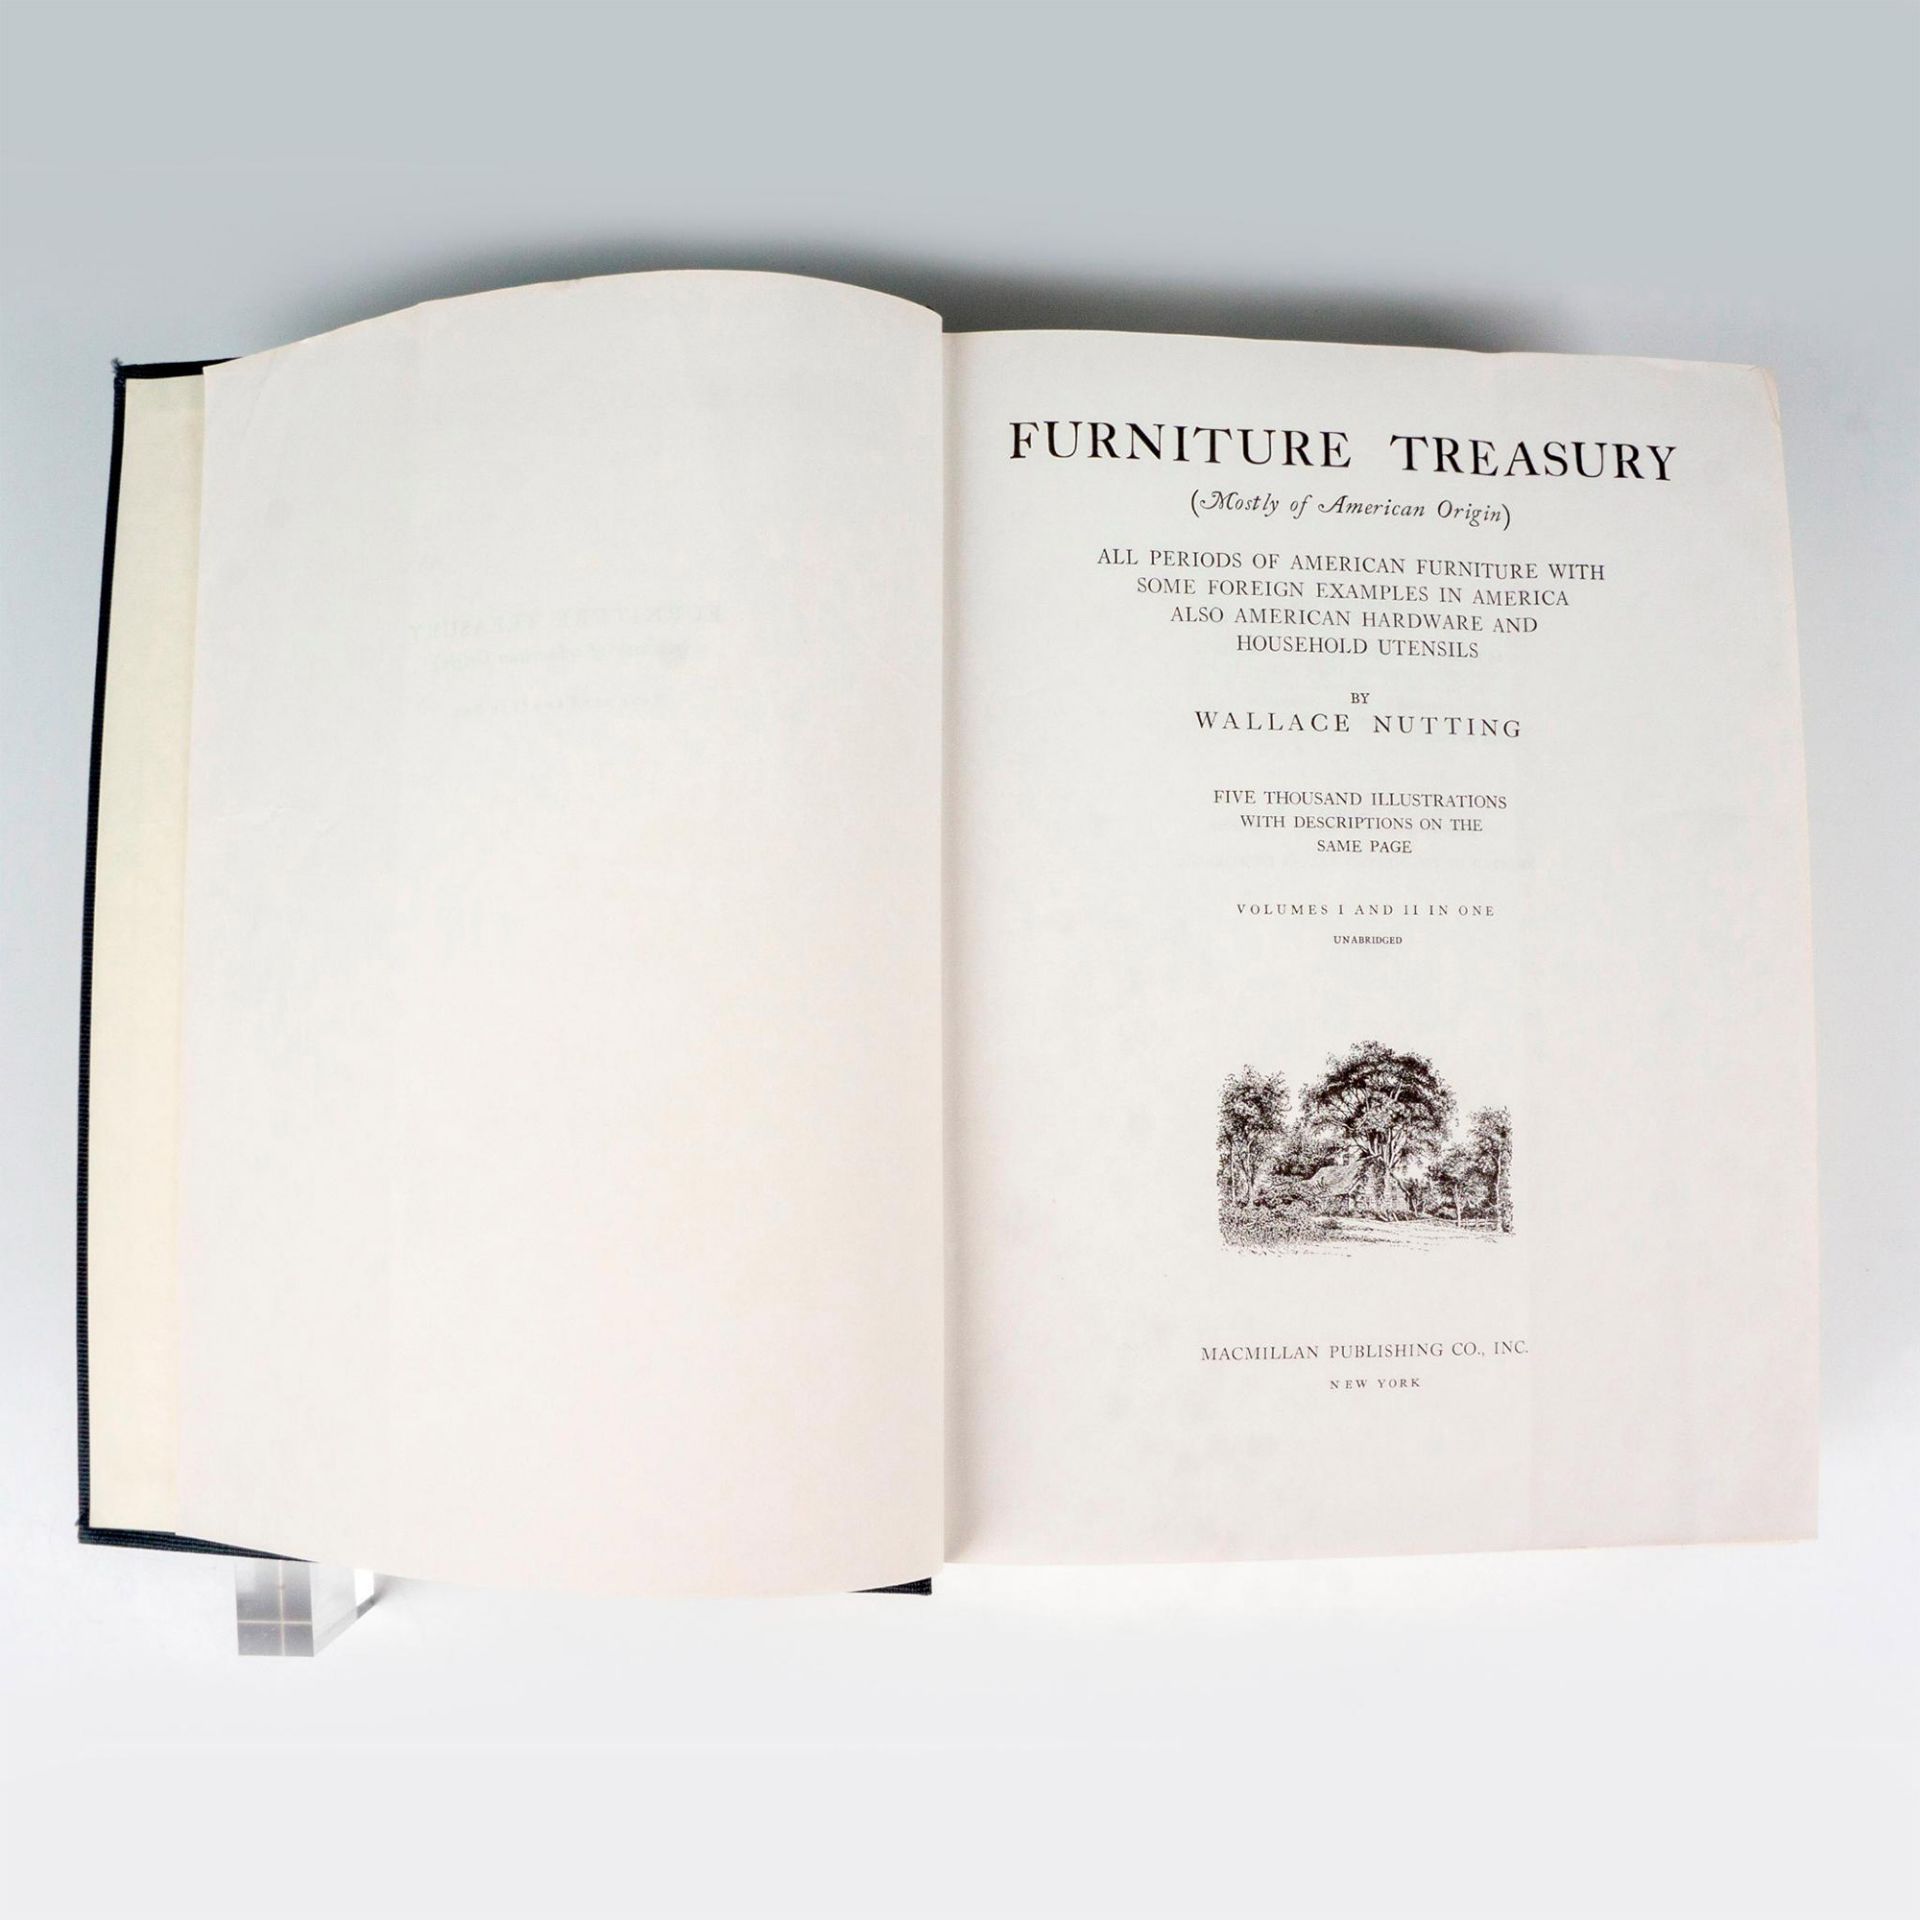 Furniture Treasury Volumes 1 & 2, Book by Wallace Nutting - Image 4 of 4